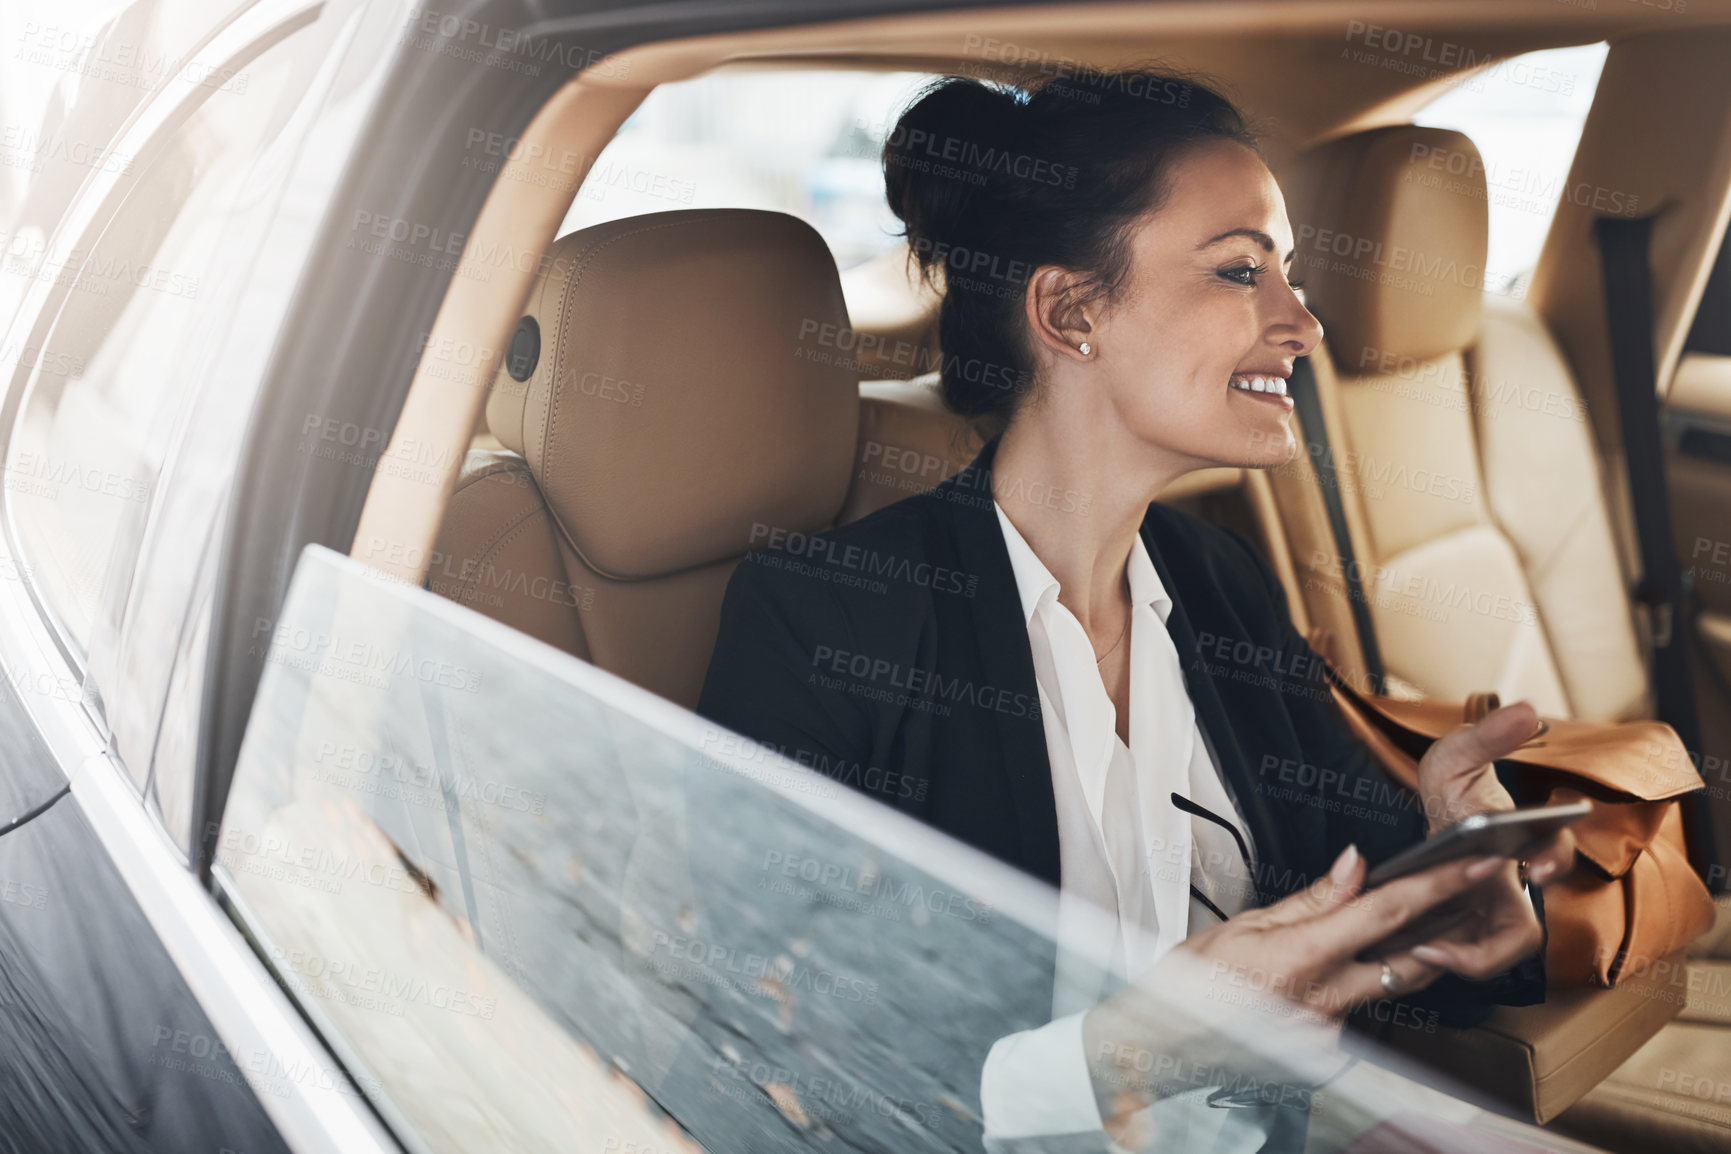 Buy stock photo Shot of a cheerful young businesswoman seated in a car as a passenger while texting on her phone on her way to work